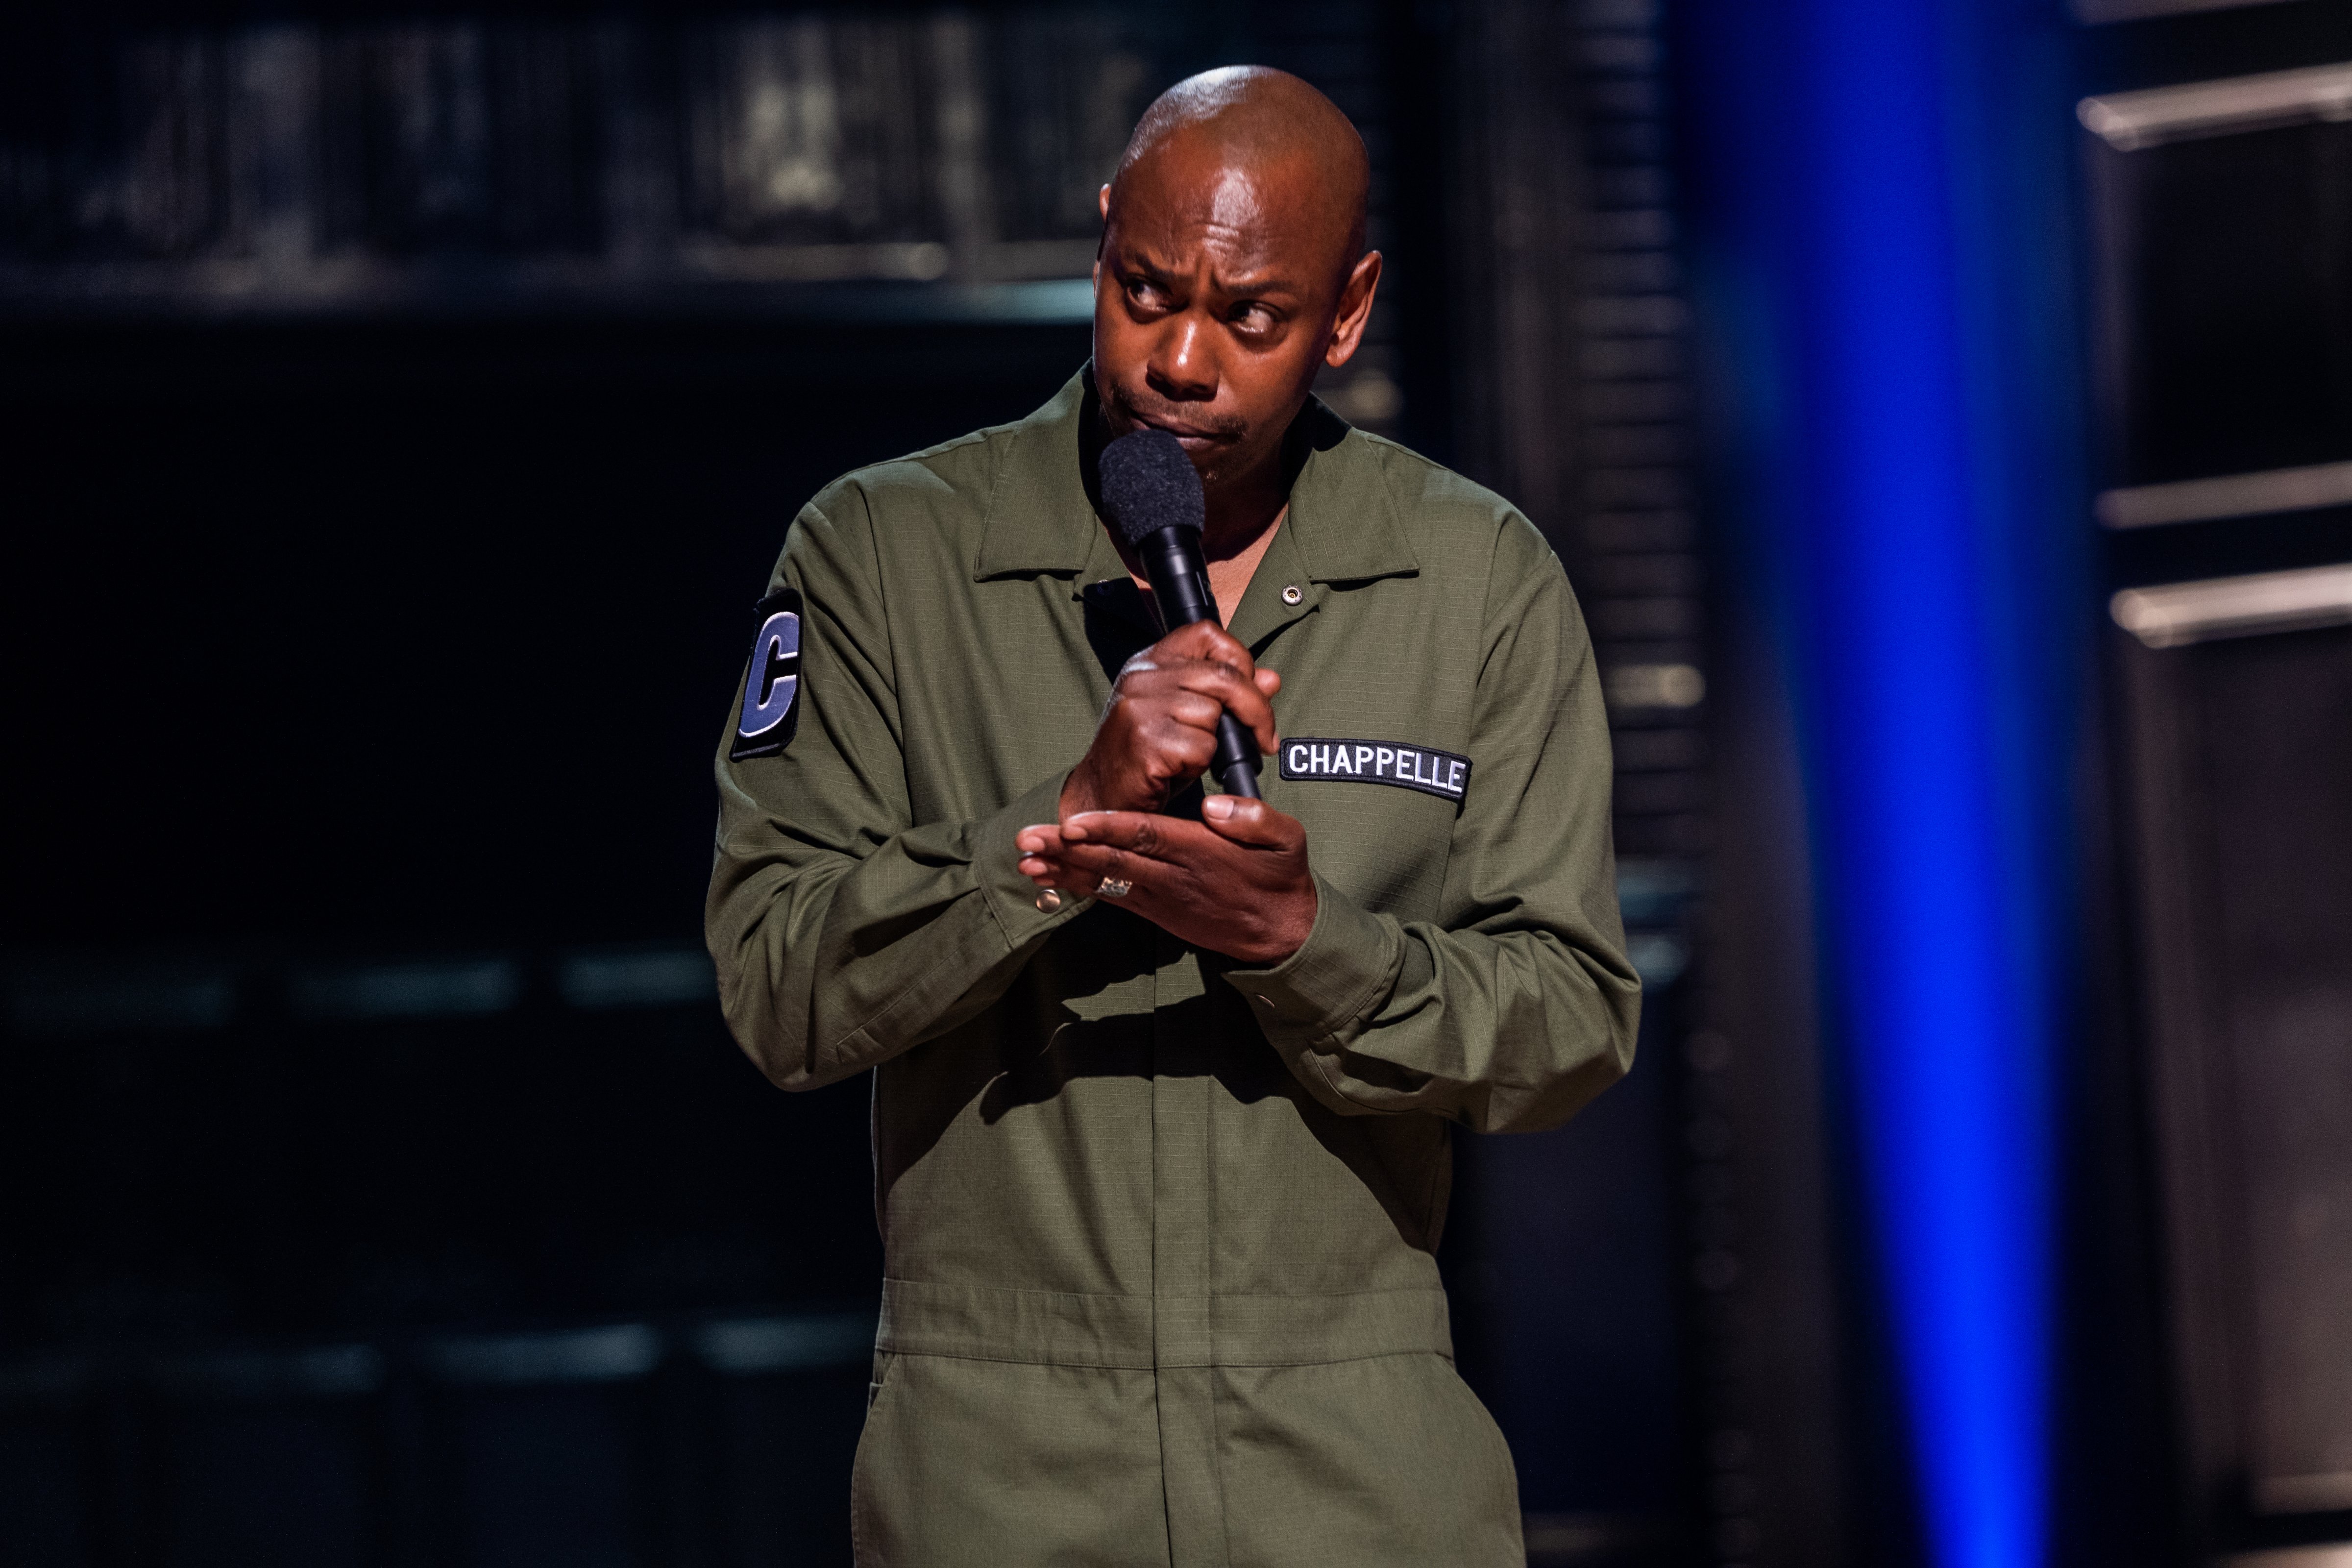 Dave Chappelle performs stand-up in his 2019 Netflix special 'Sticks and Stones' (Mathieu Bitton/Netflix)